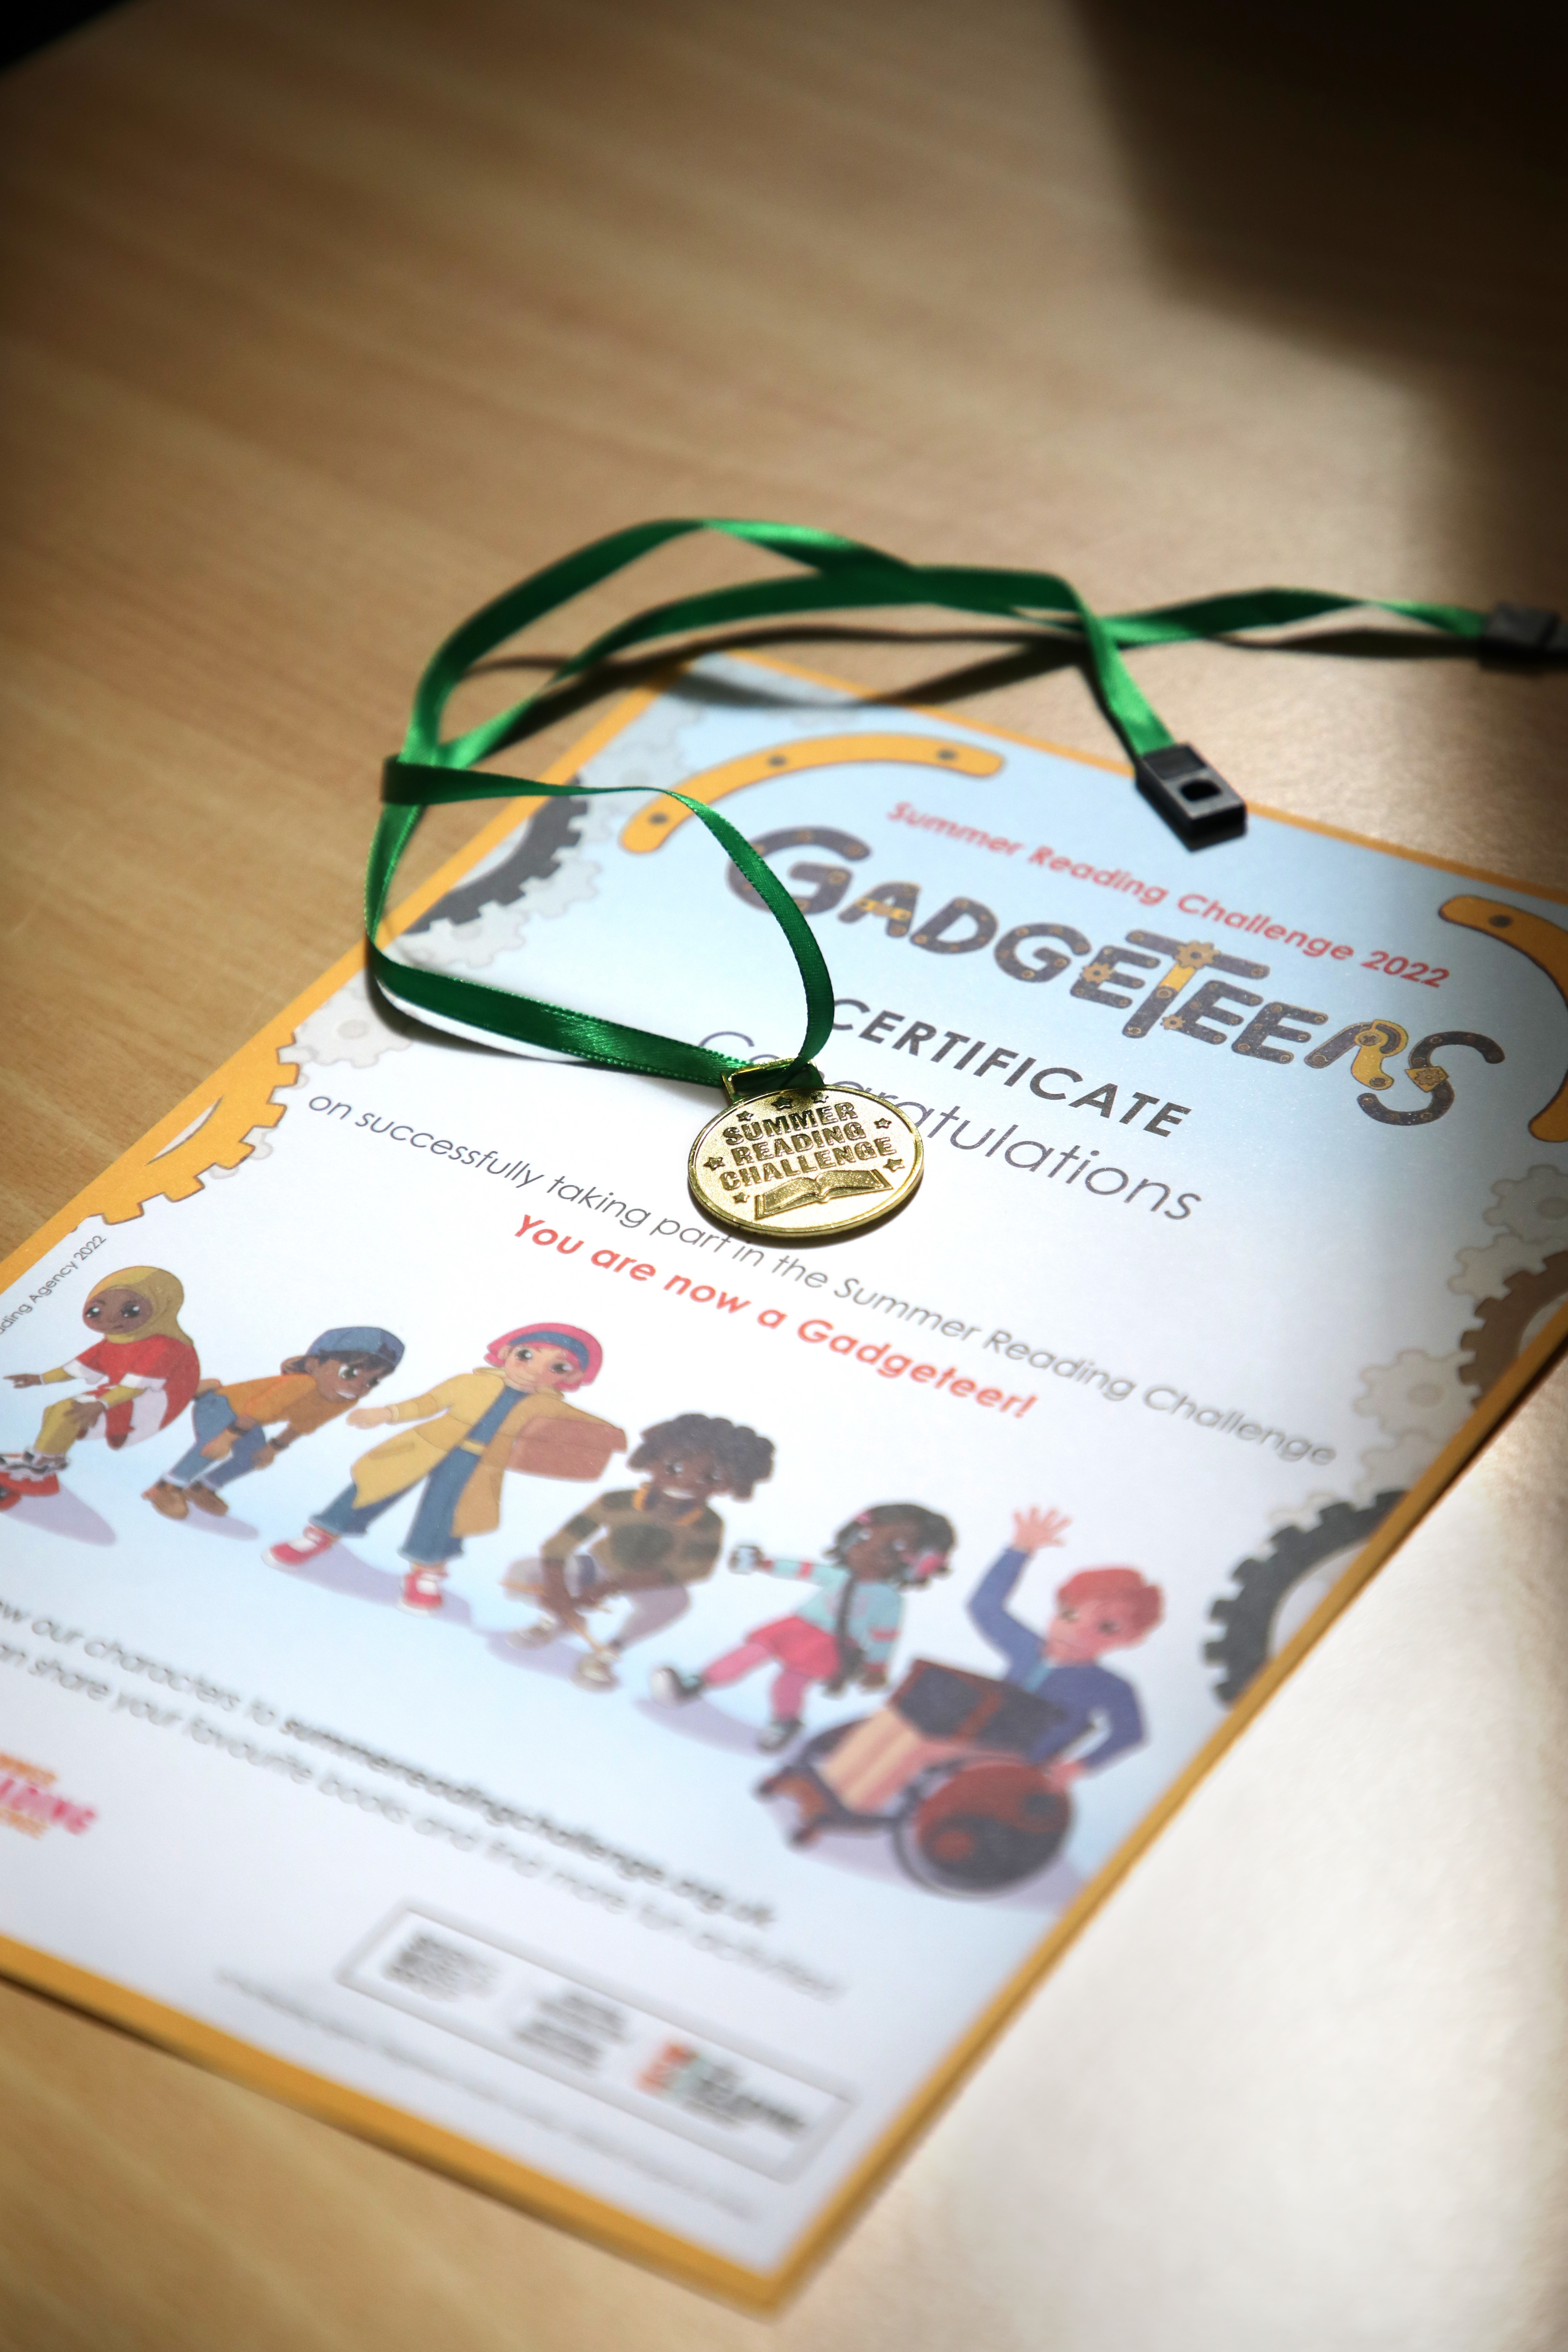 Summer Reading Challenge certificate and medal